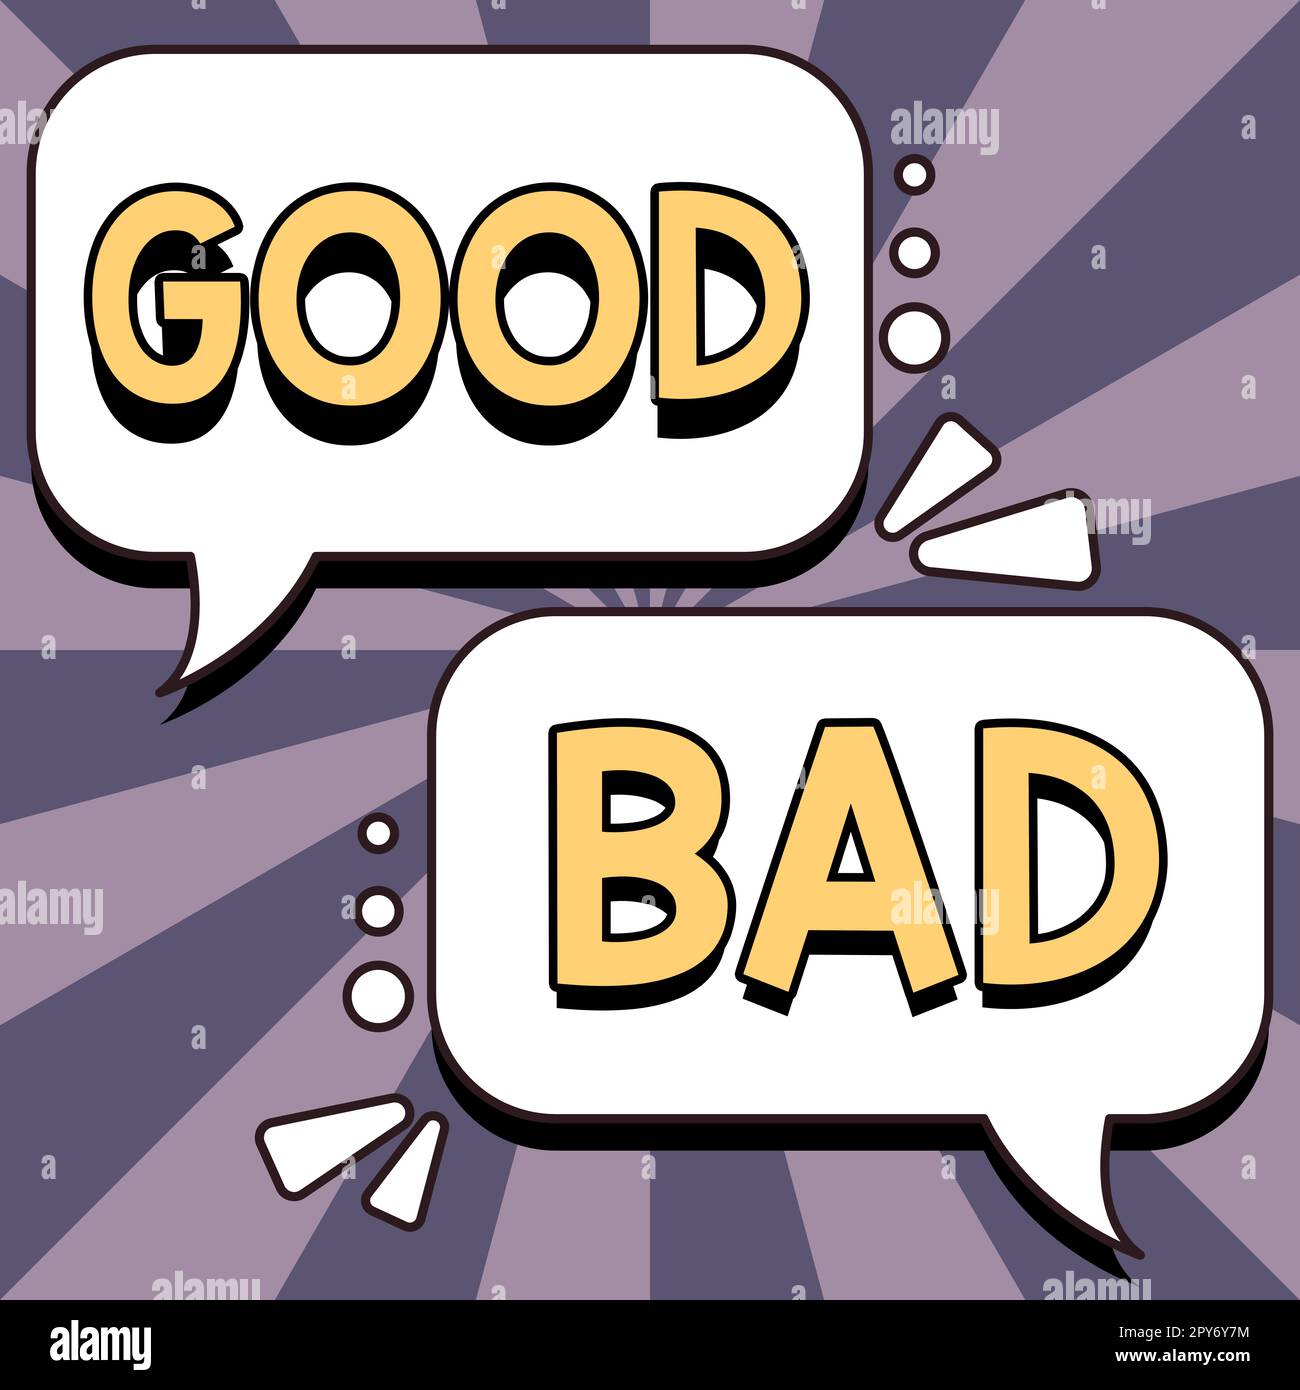 Hand writing sign Good Bad. Internet Concept to seem to be going to have a good or bad result Life choices Stock Photo